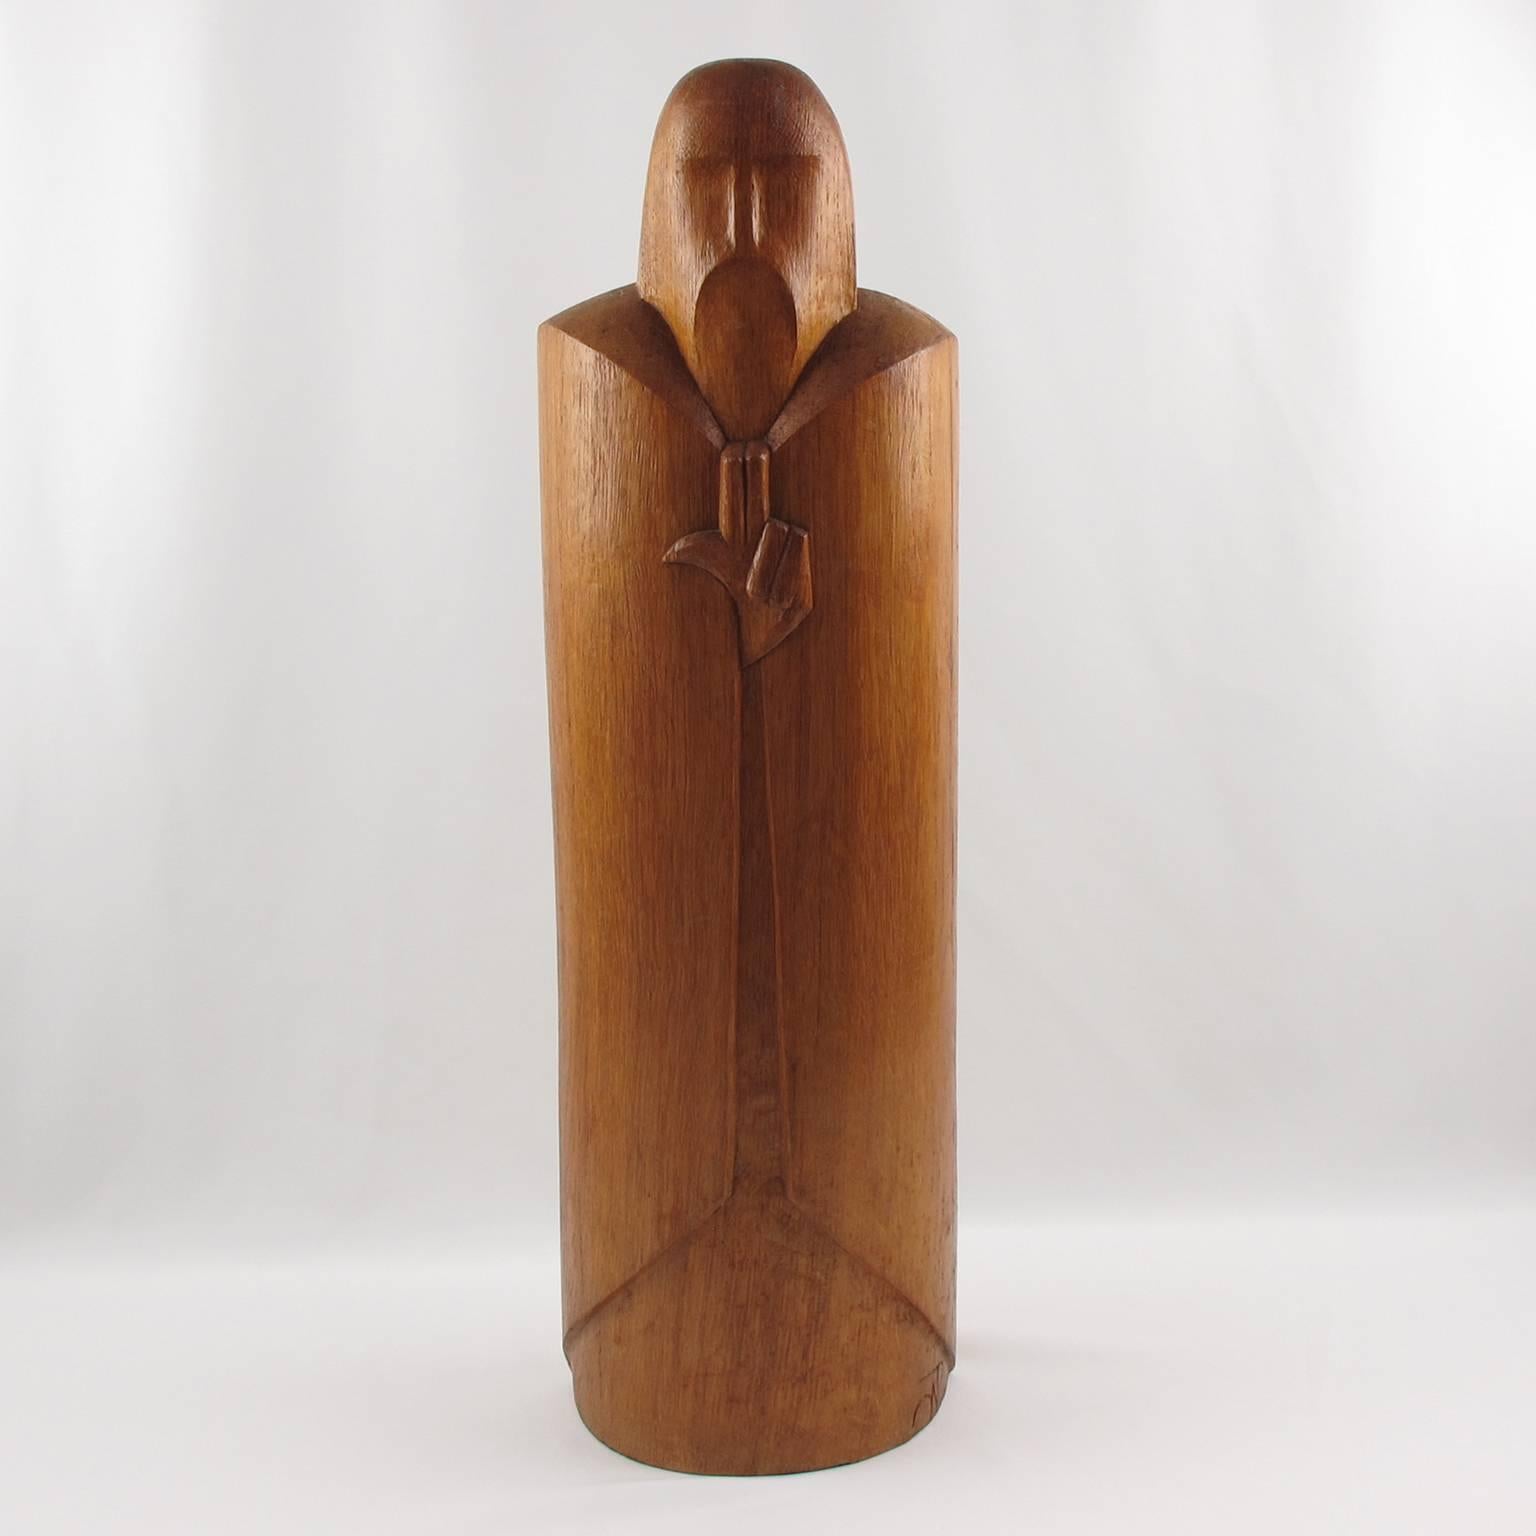 Mid-Century Modern Rare Wood Sculpture Monk or Knight Design by Wenzel Profant, circa 1950s